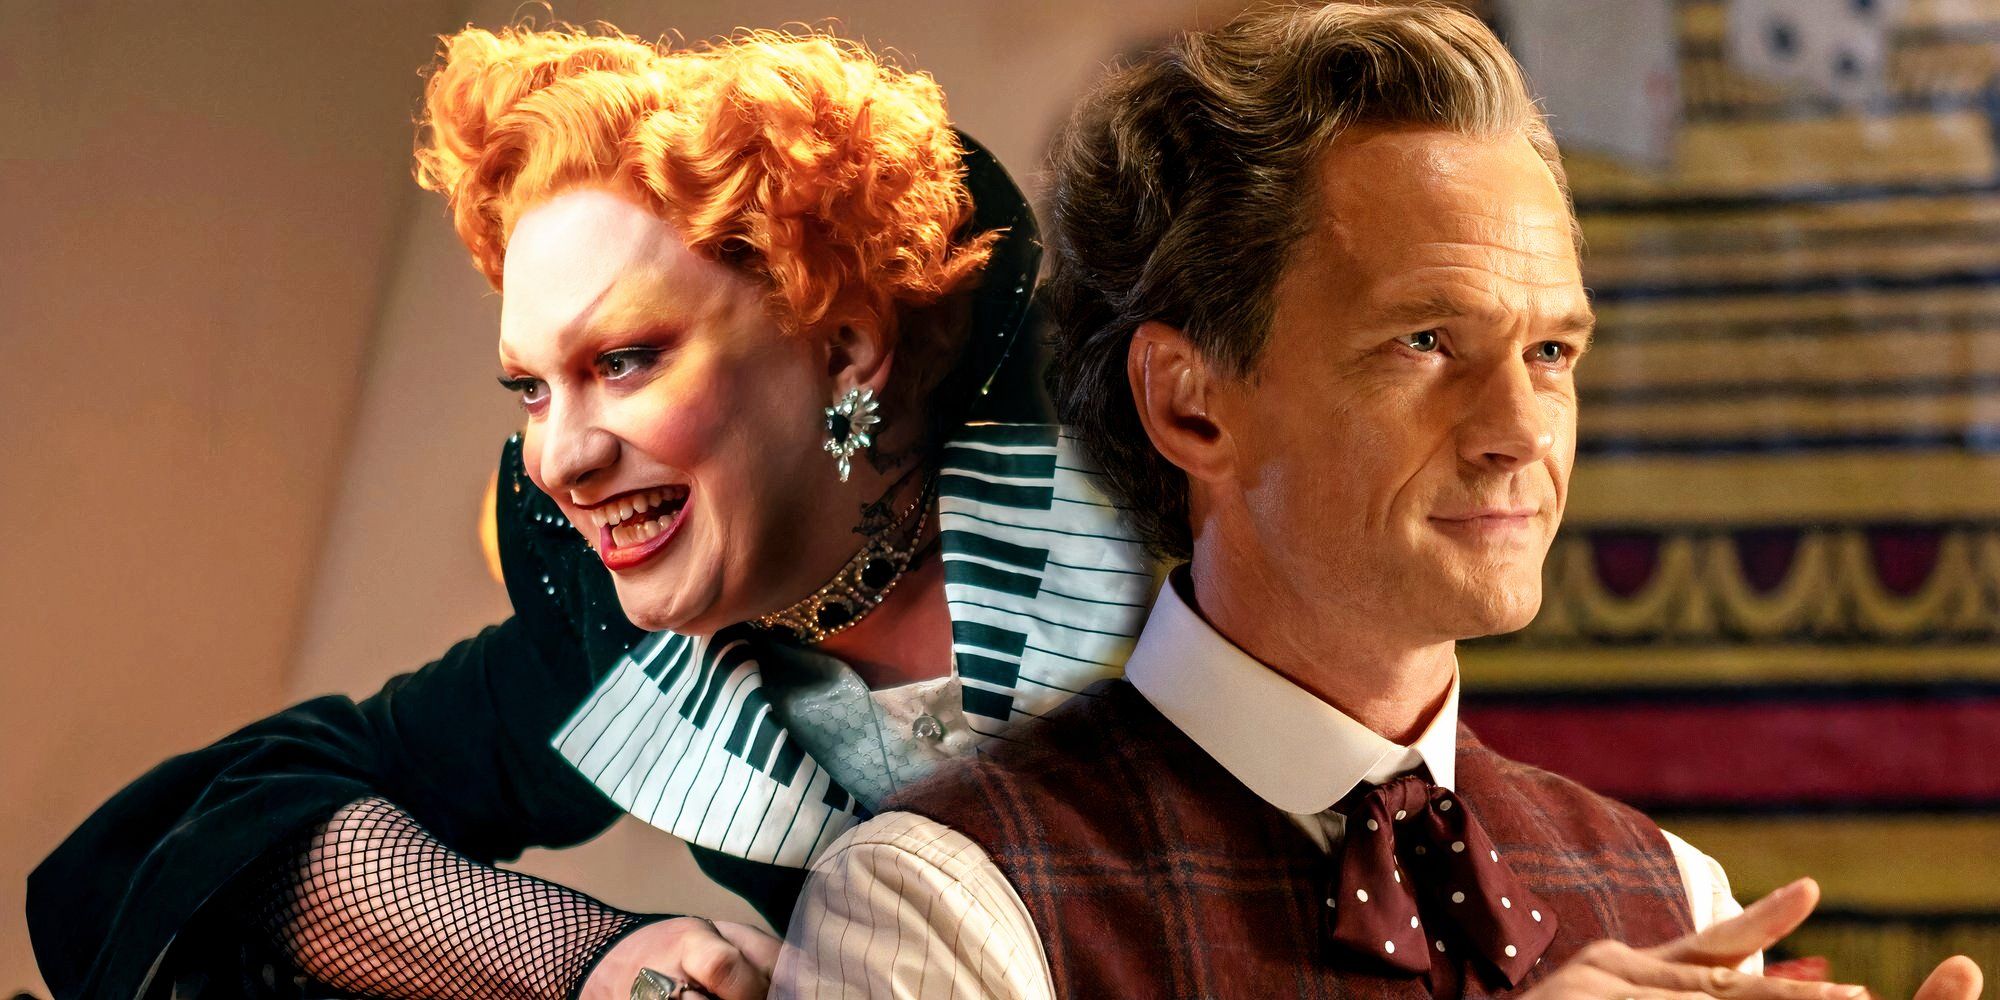 Jinkxx Monsoon as Maestro and Neil Patrick Harris as the Toymaker side by side in Doctor Who